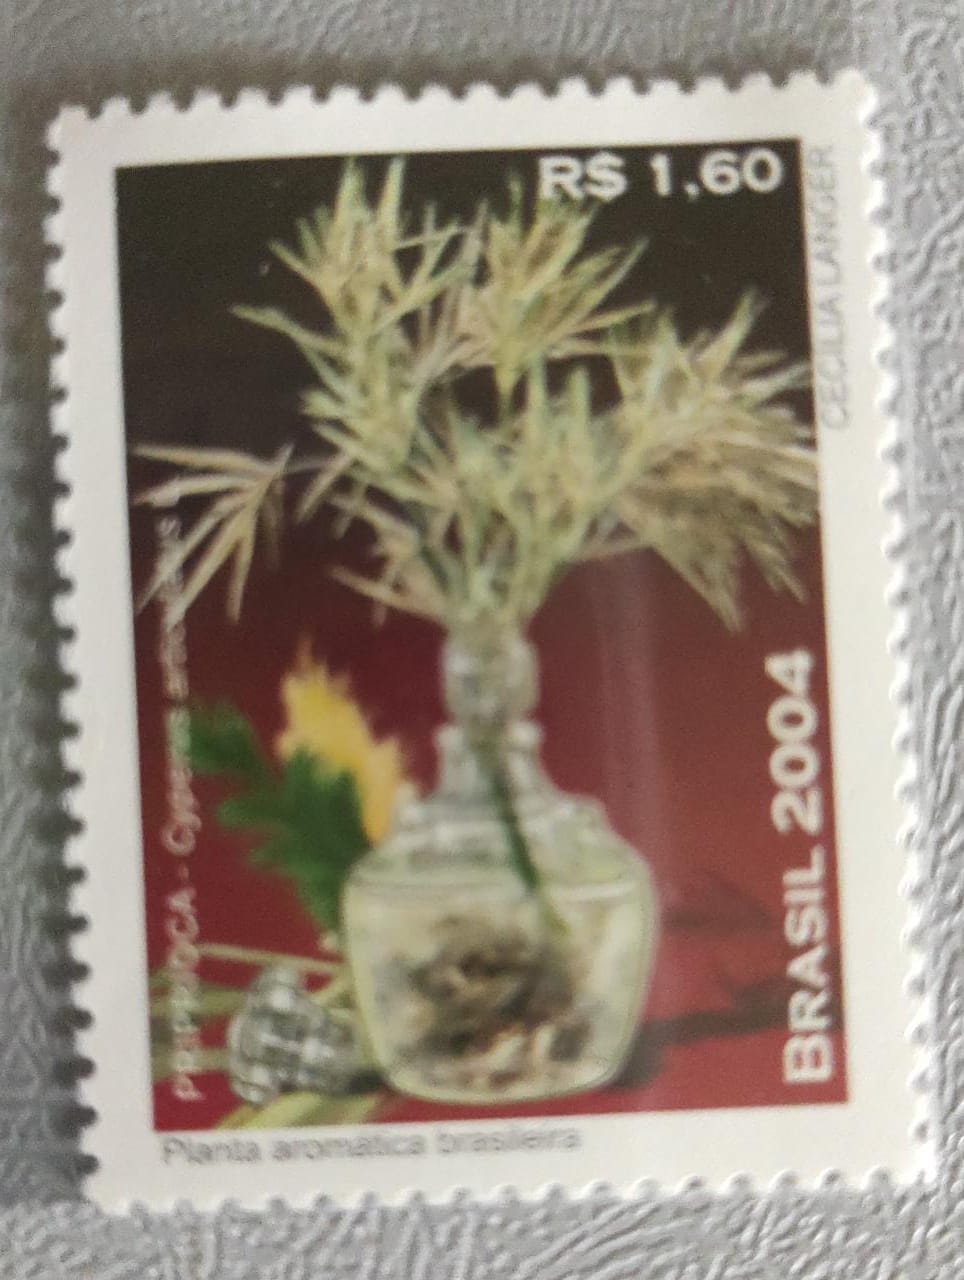 Brazil stamp issued in 2004 With fragrance of priprioca.